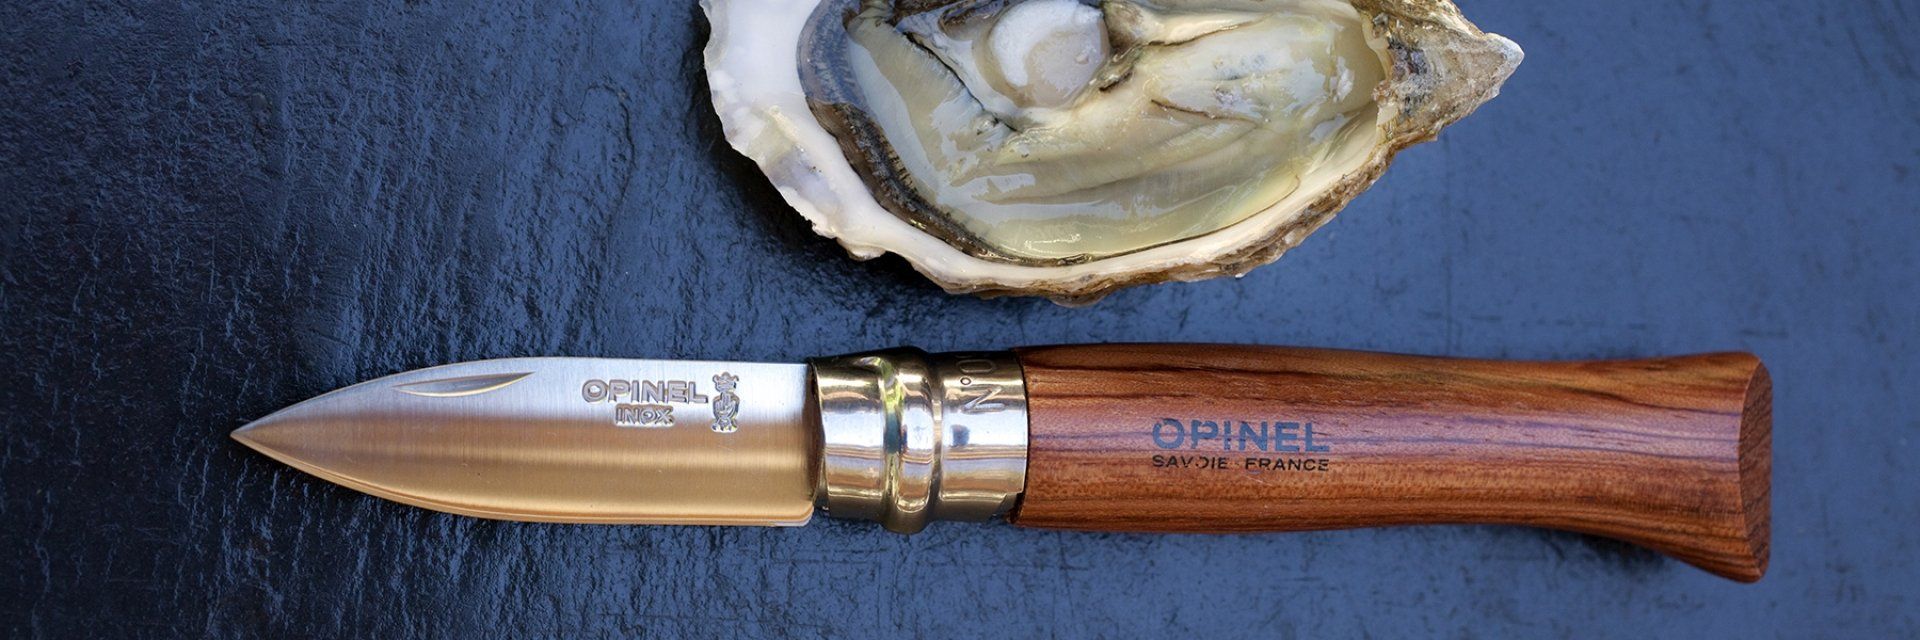 Opinel oyster knife No 09  Advantageously shopping at